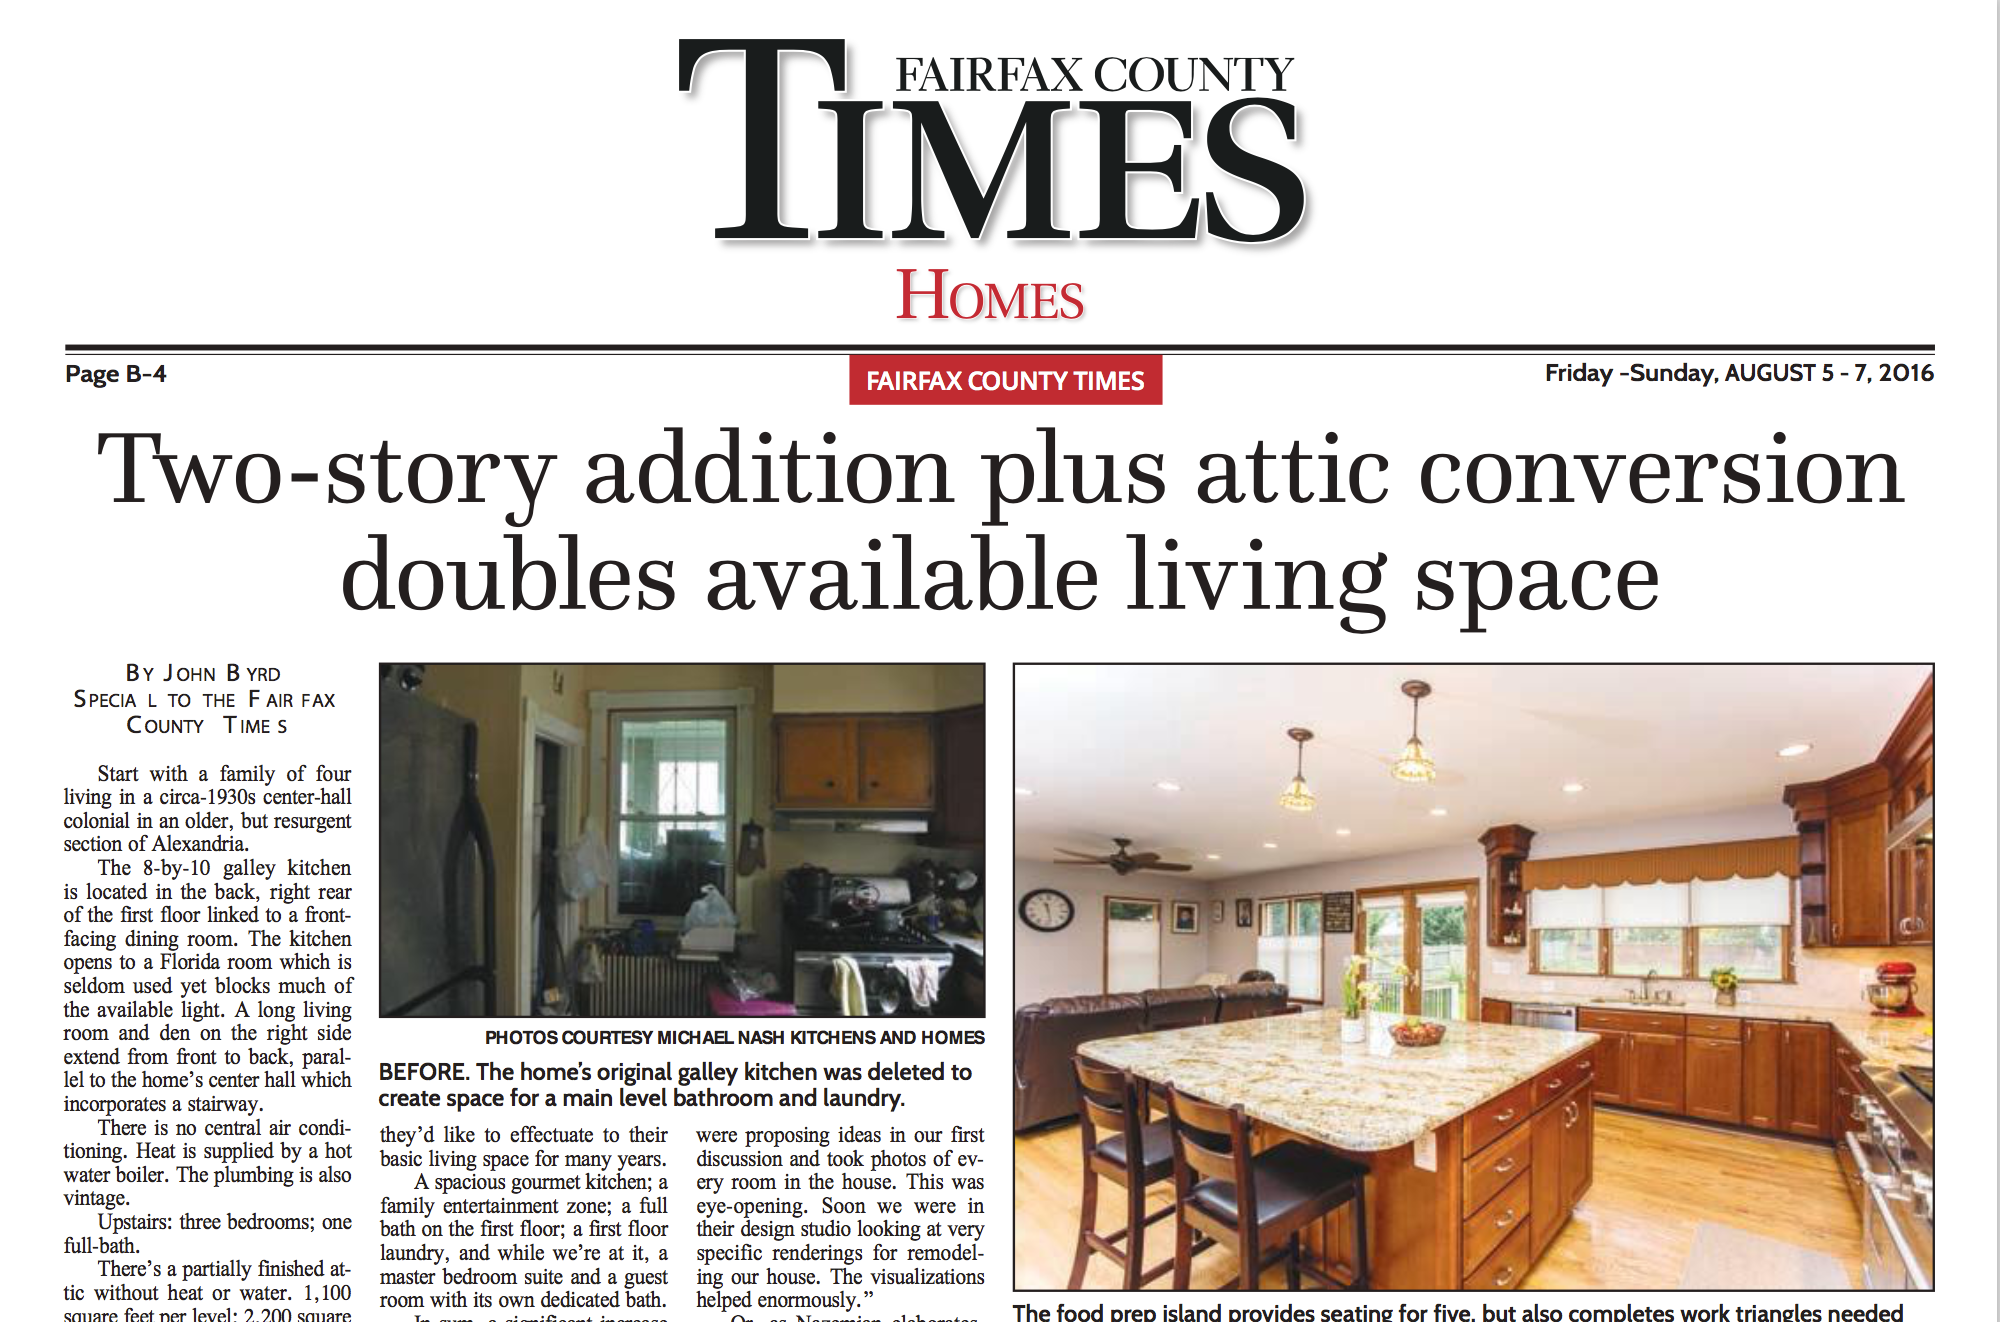 Two-story addition plus attic conversion doubles available living space